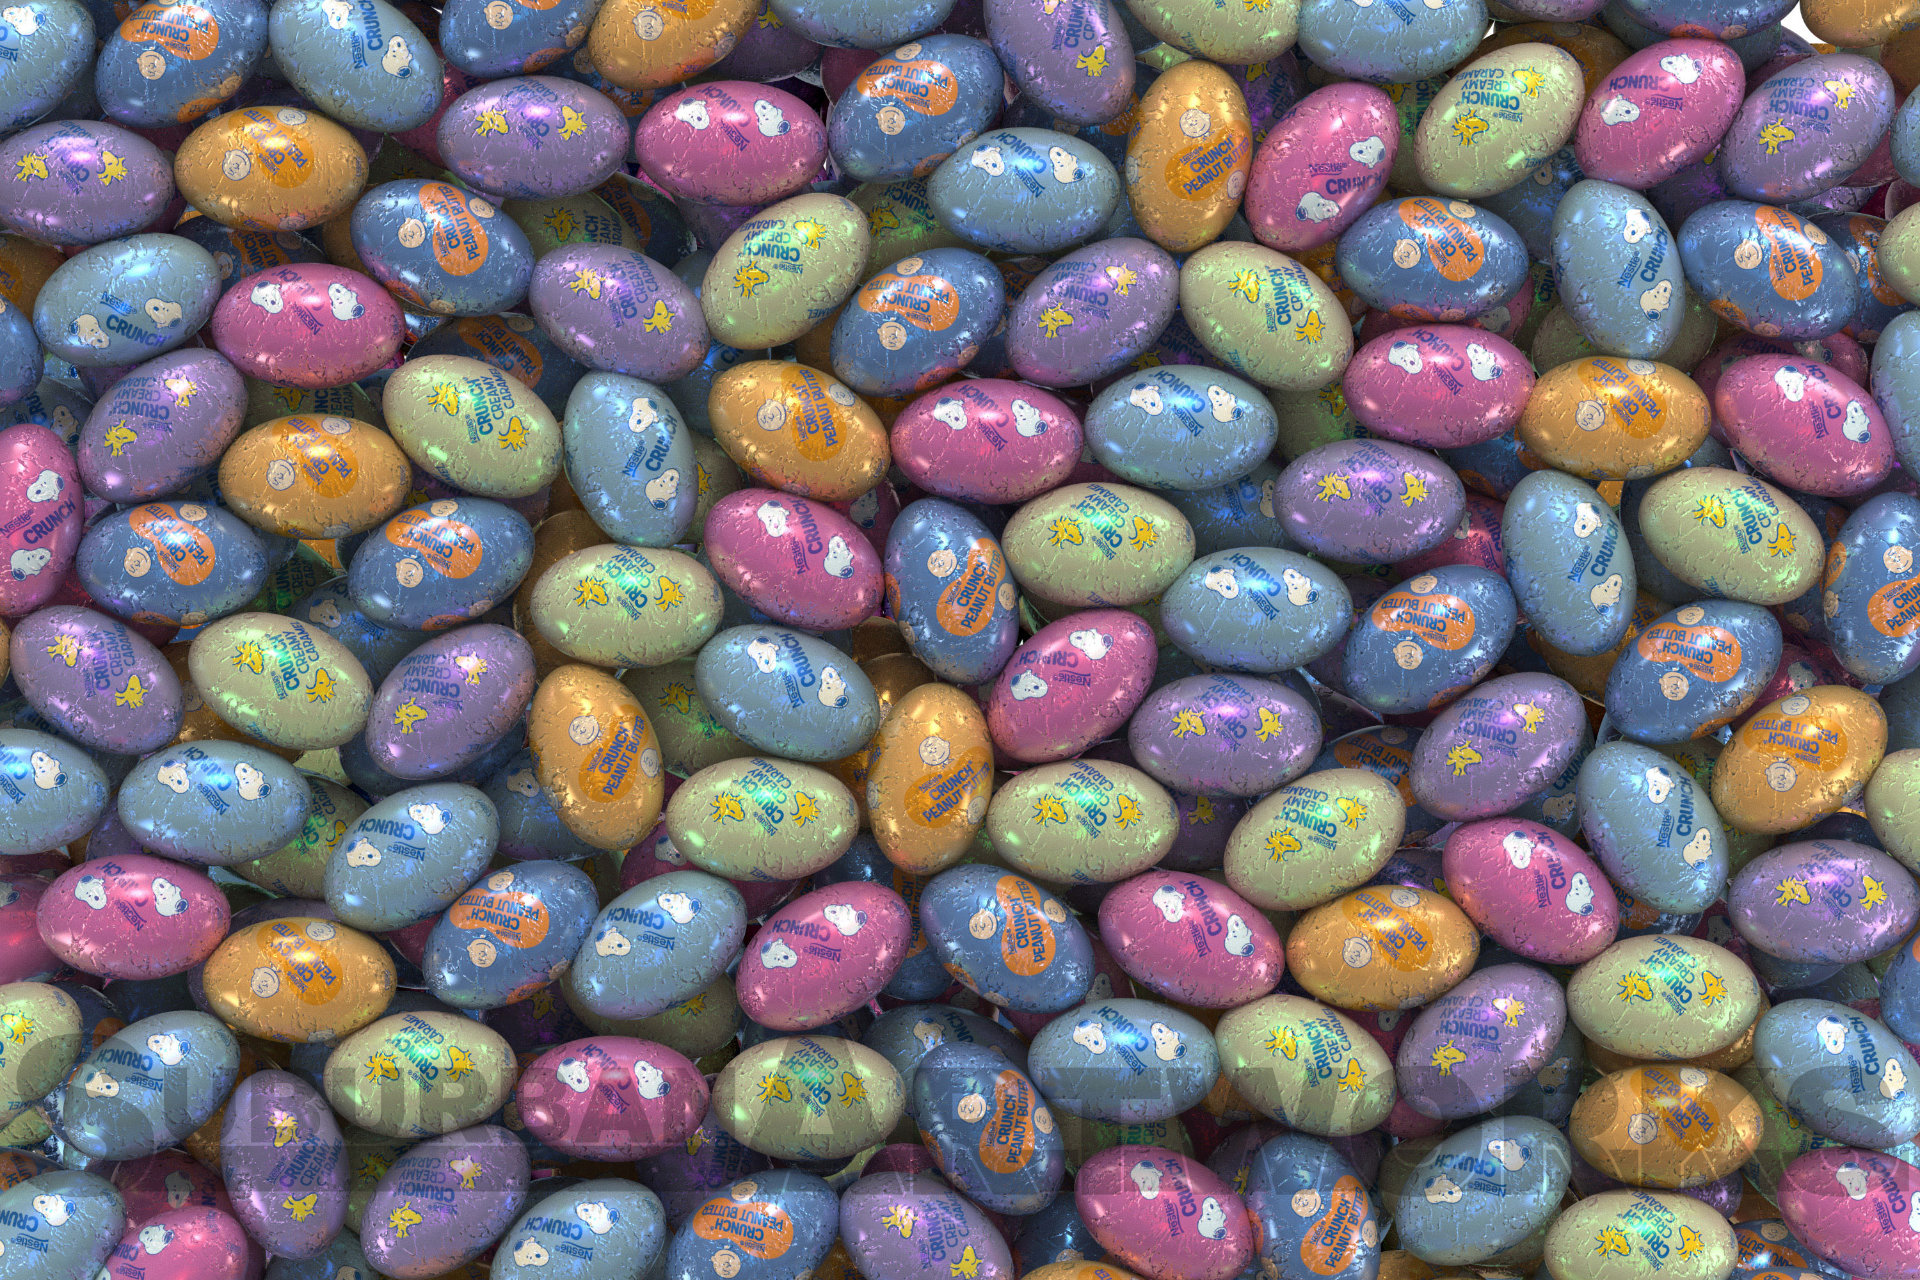 3d rendering of a pile of chocolate eggs in foil wrappers